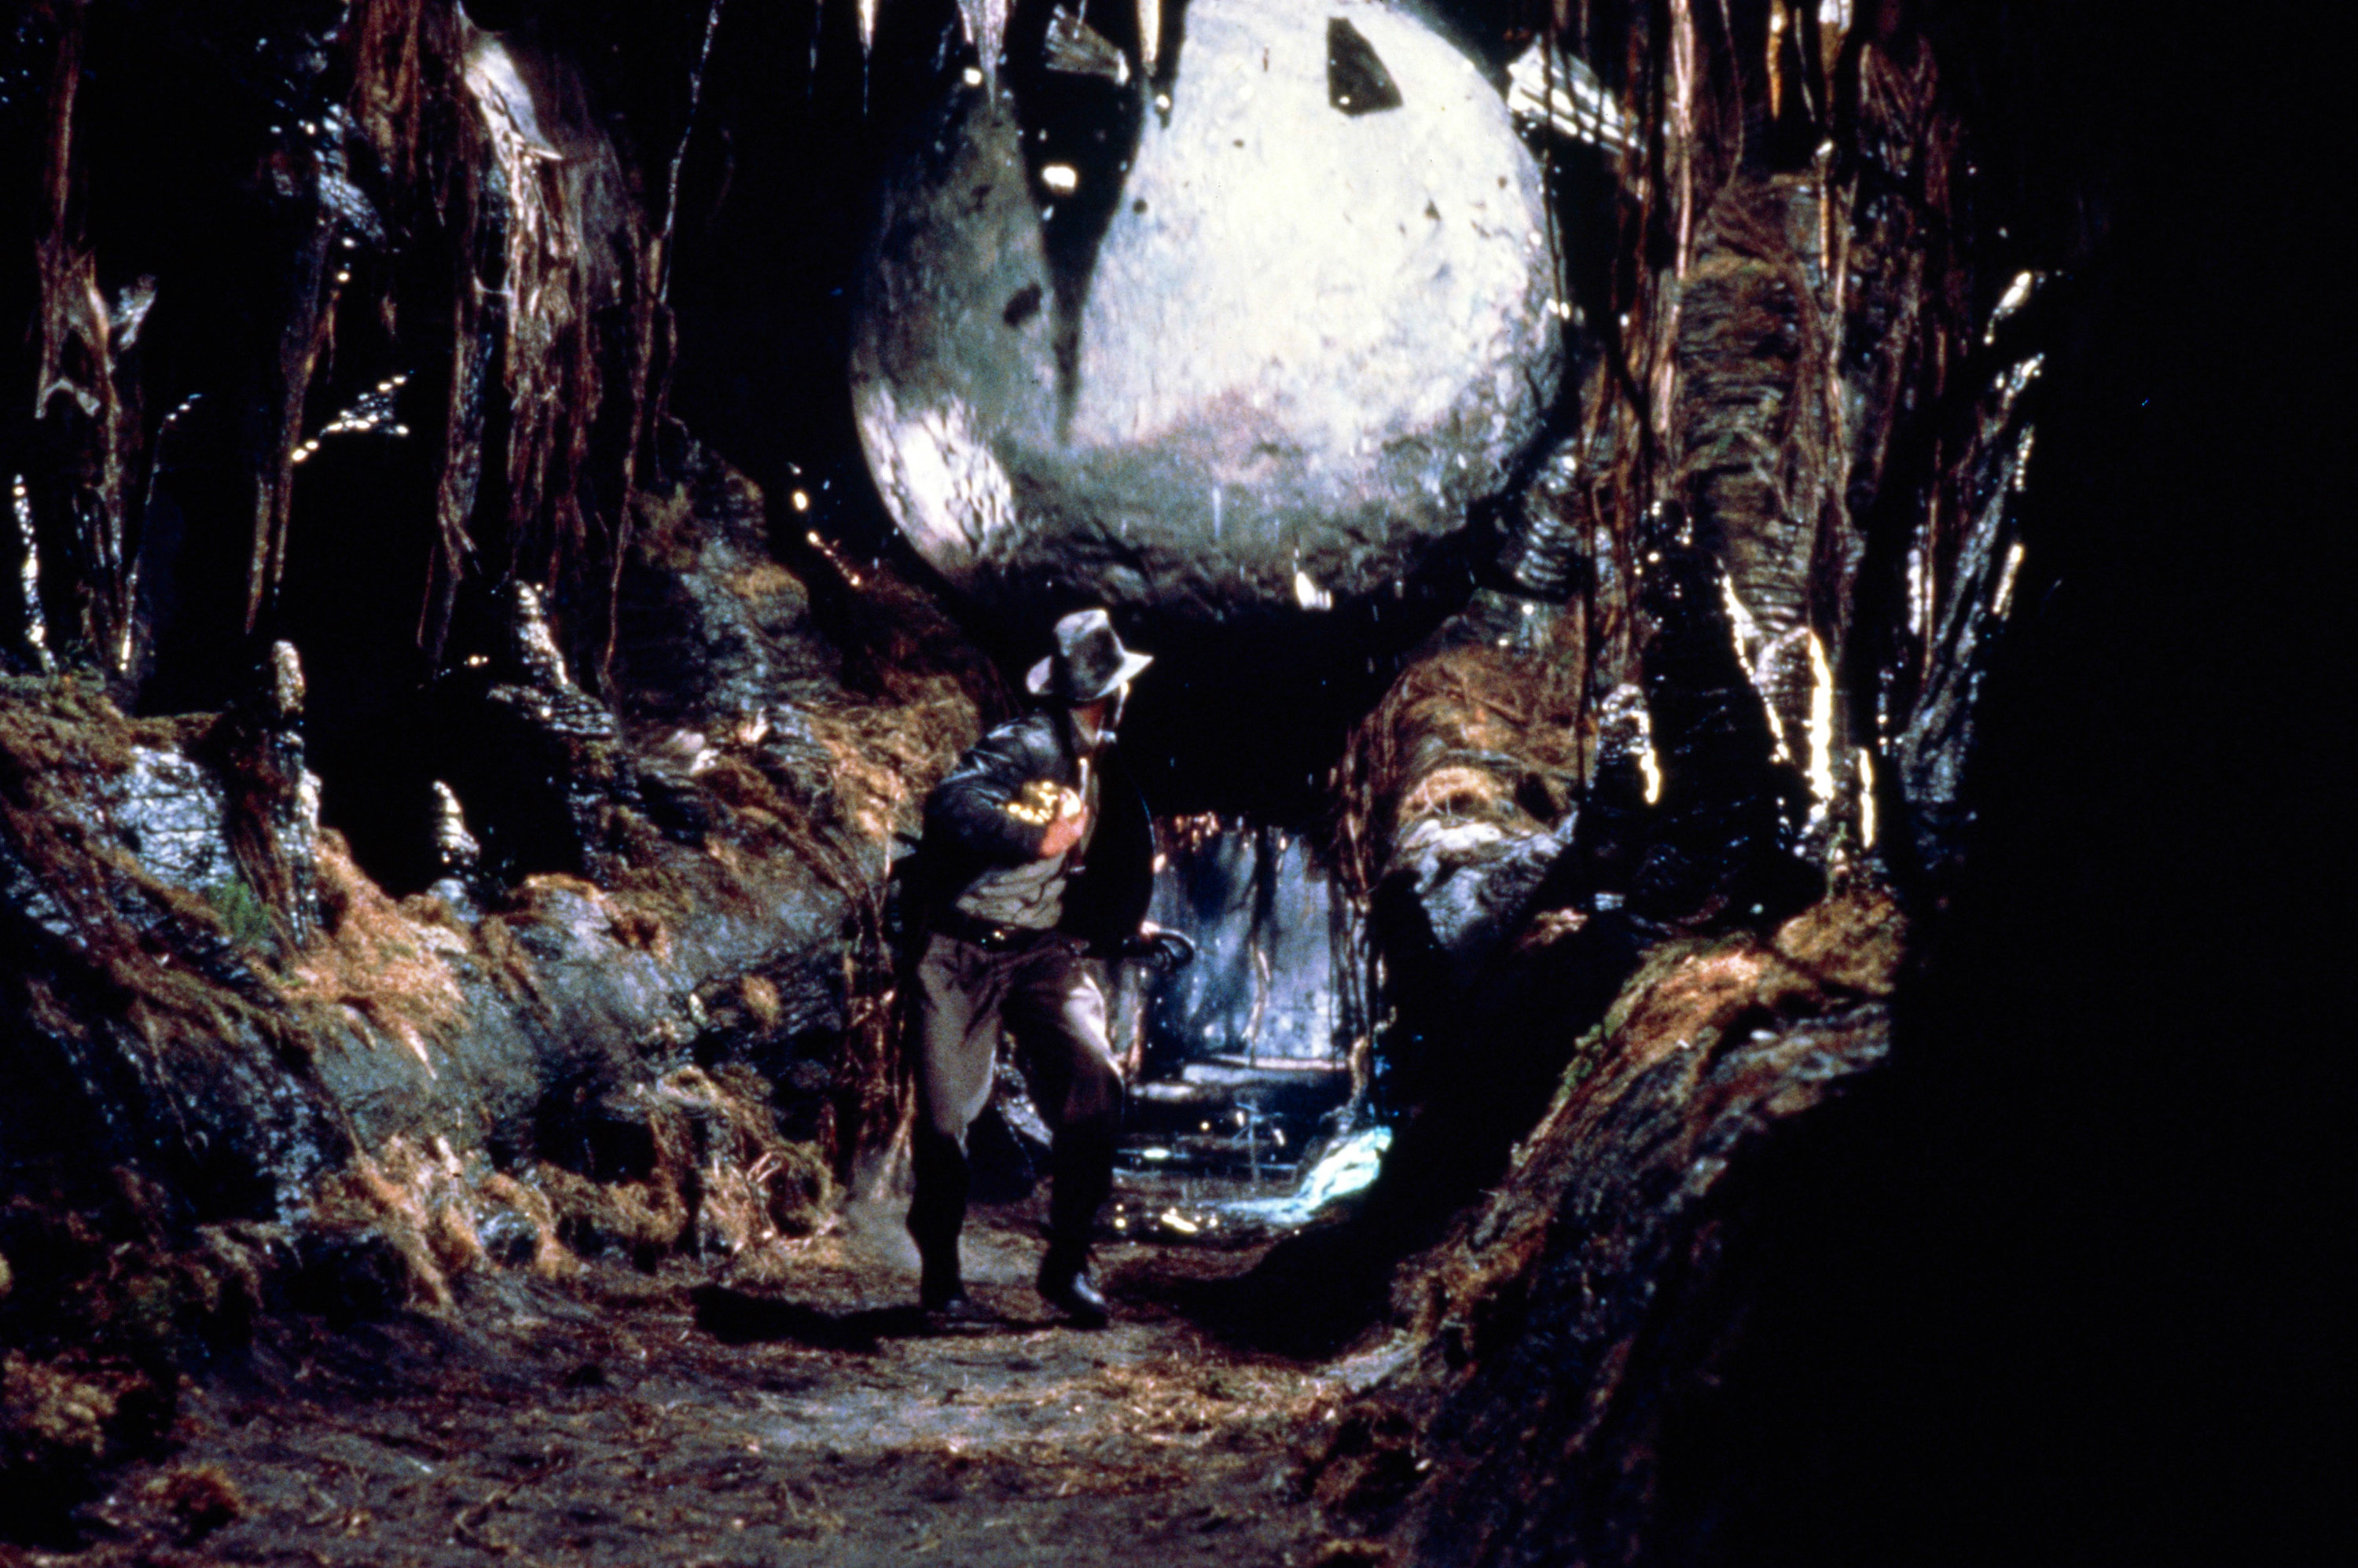 Photo of Indiana Jones running from a giant boulder in a cave